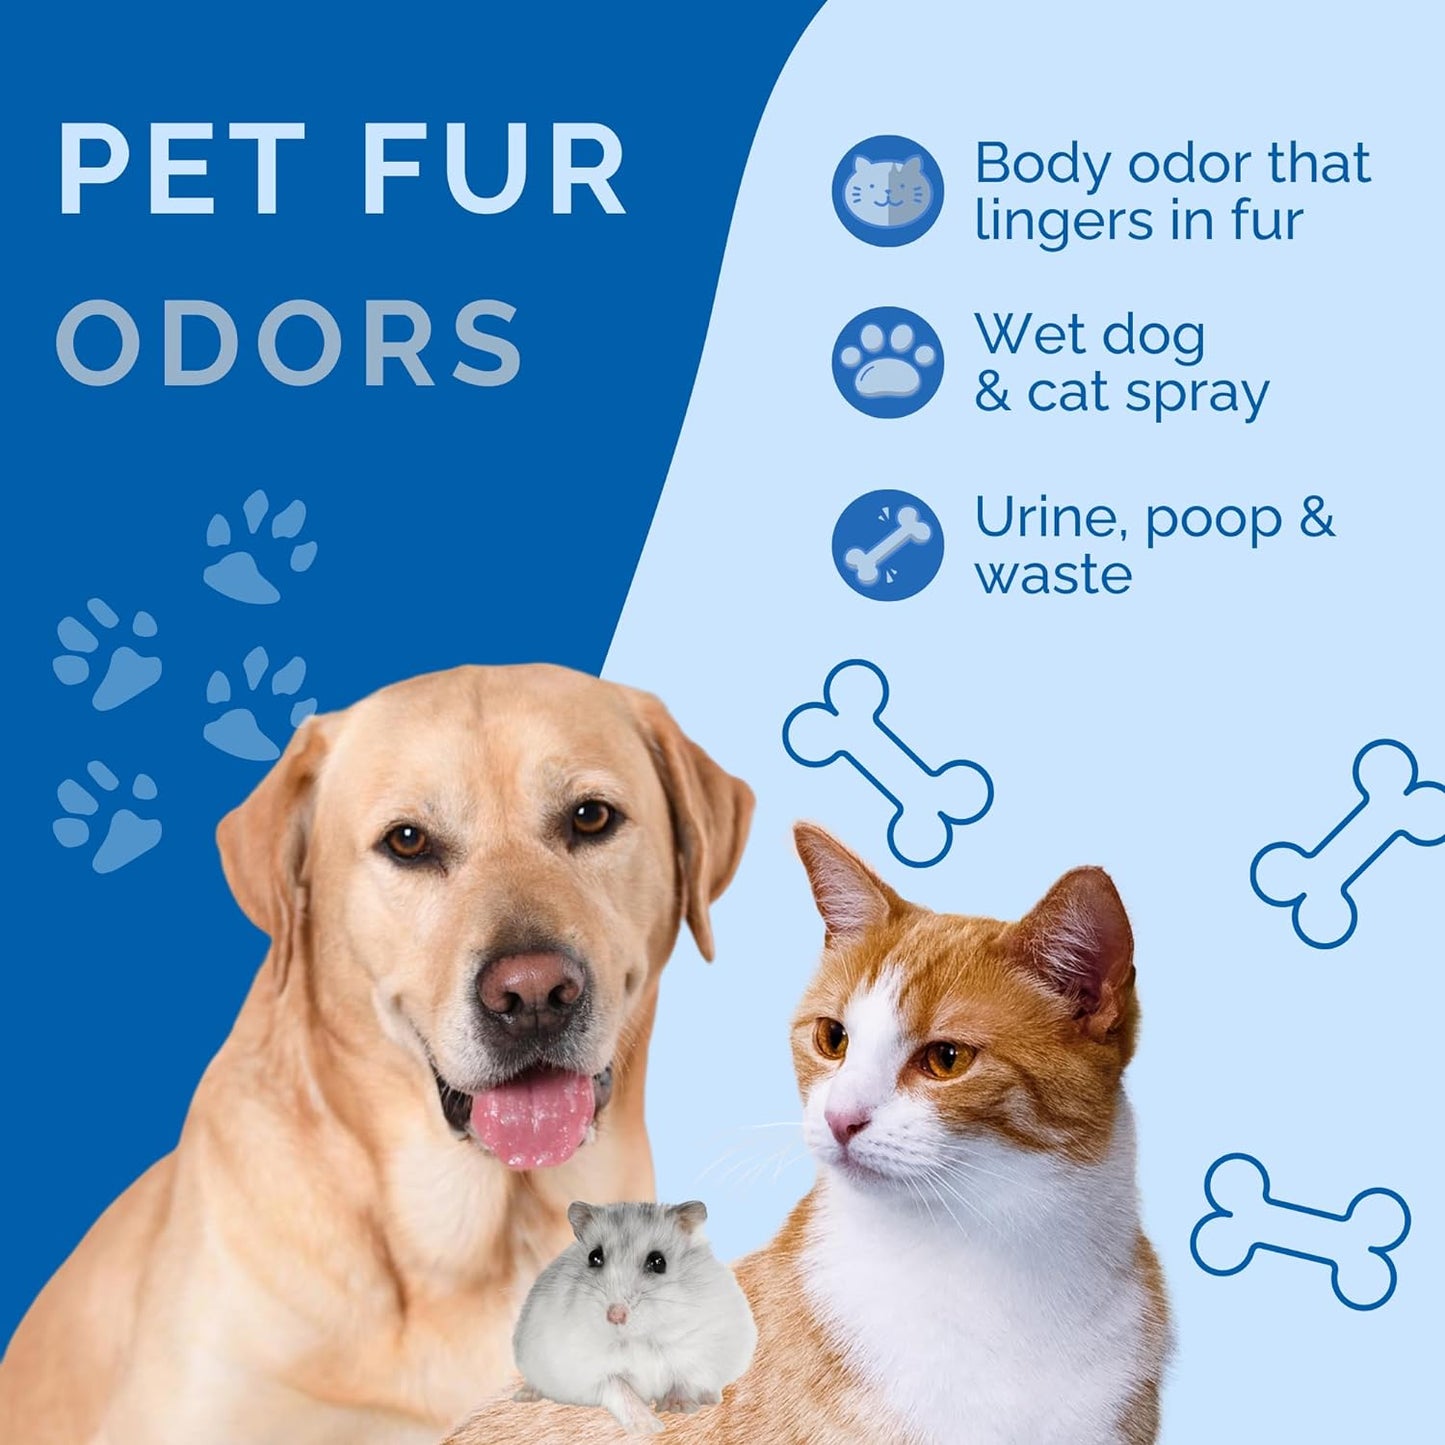 No Scent Pet Fur Odor Spray & Rinseless Bath for Dogs, Cats, Hamsters and Small Animals